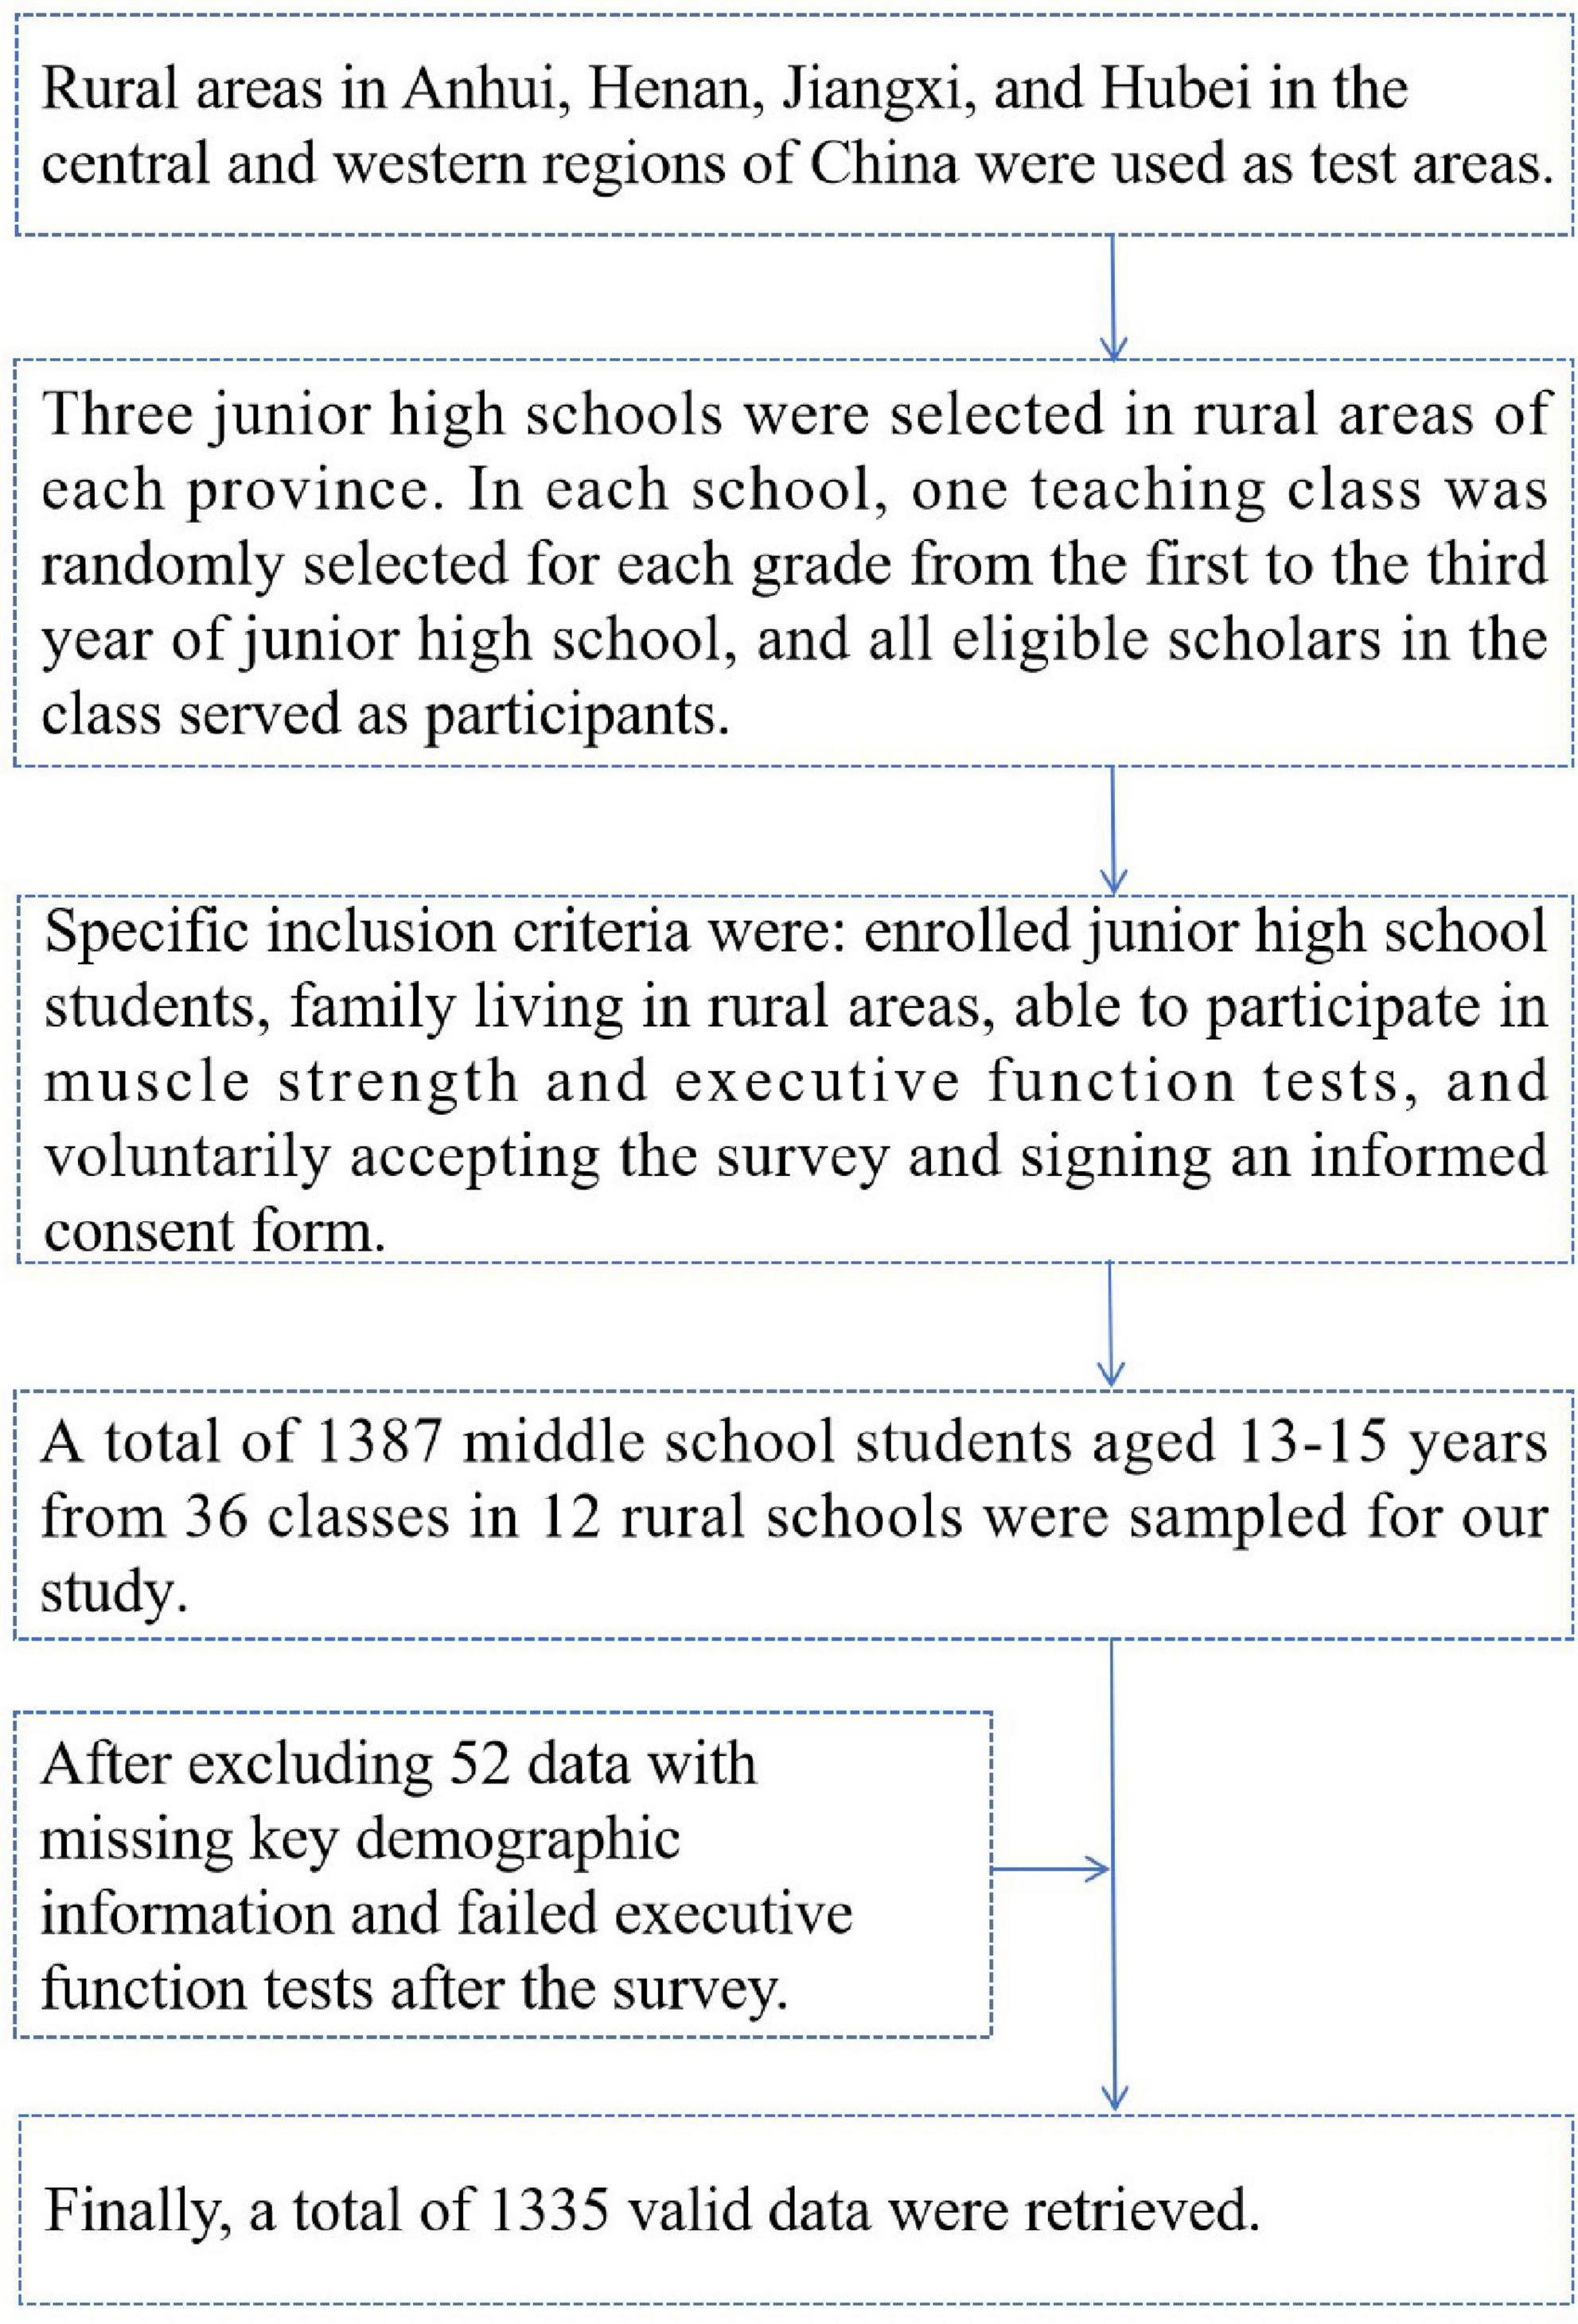 The association between muscle strength and executive function in children and adolescents: Based on survey evidence in rural areas of China